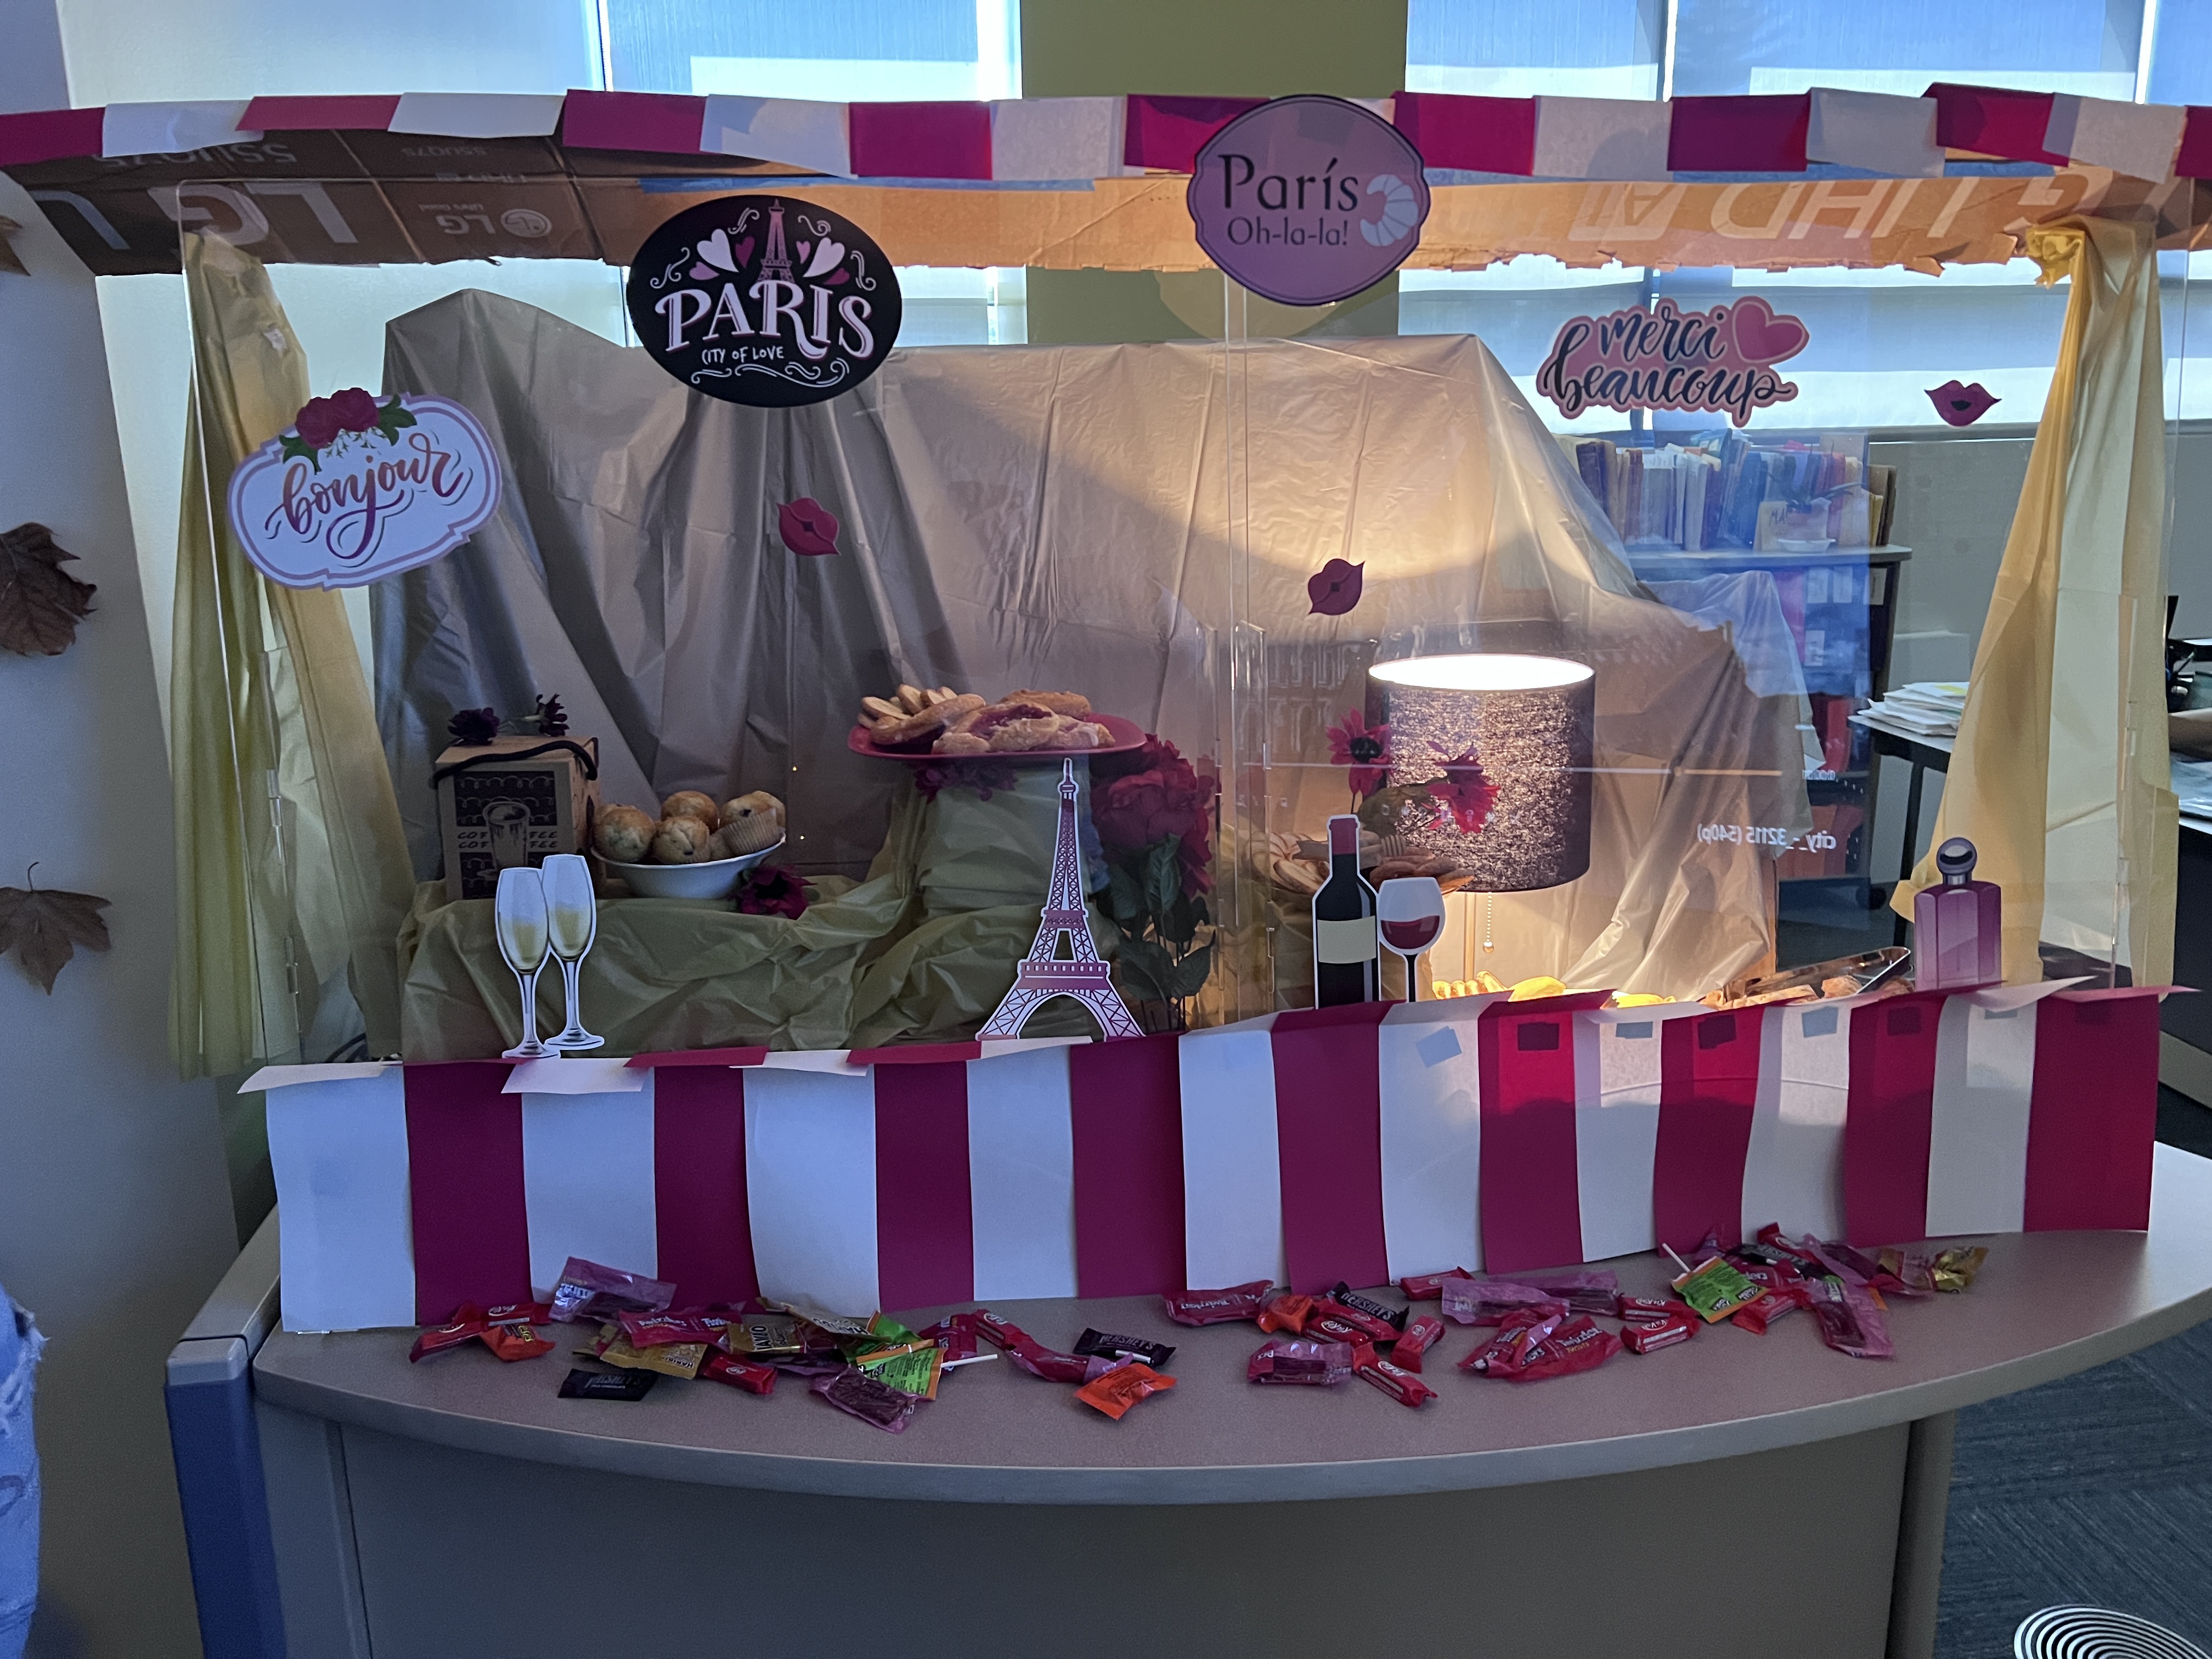 Center for Teaching and Learning “Fall in Paris” decorated bakery window display with candy in front